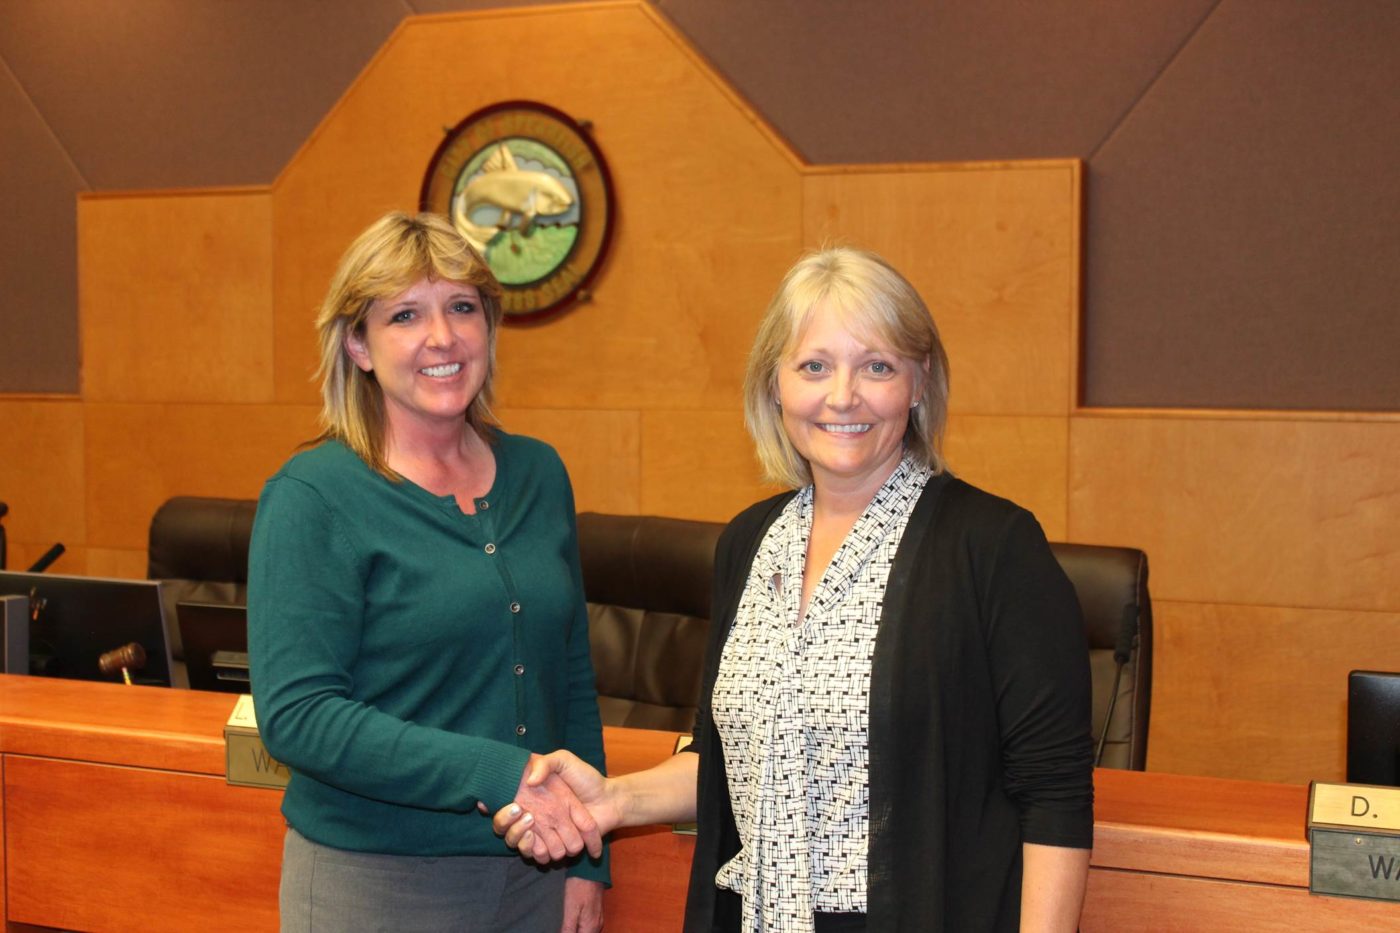 Teresa Farnsworth (left), area manager for Air Methods, and Dana Boke, mayor for the City of Spearfish, at the contract signing event on June 4 to expand the Black Hills Life Flight program into Spearfish, South Dakota. Black Hills Pioneer Photo